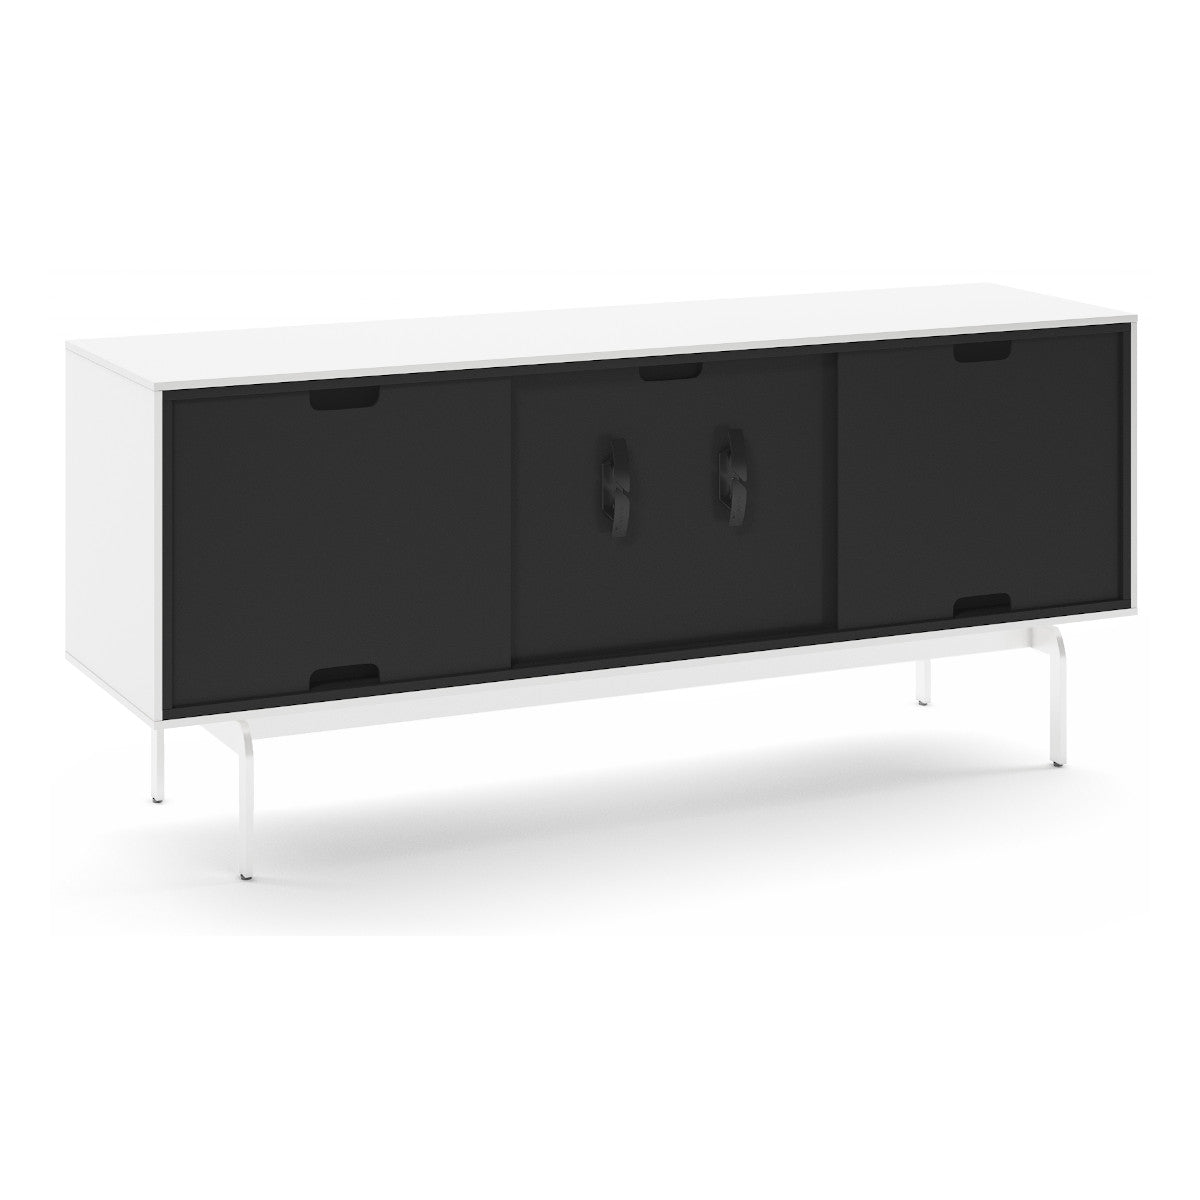 BDI Align 7477 3-door Cabinet with Console Base (Satin White)